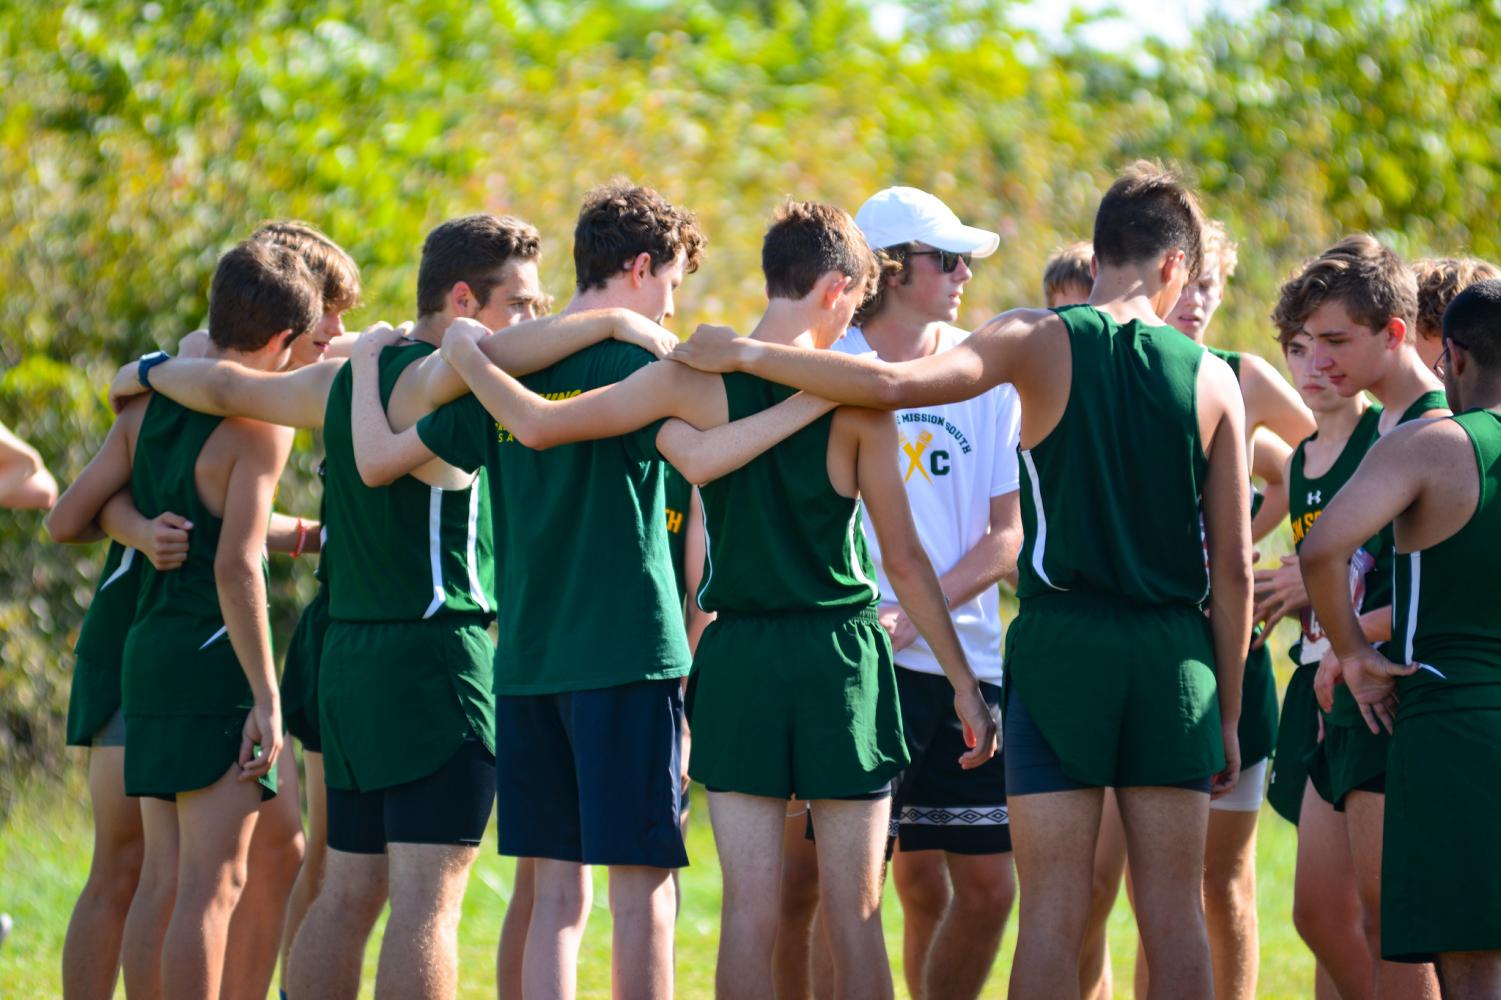 The boys huddle up at the top of the hill in SM park for the JV meet. On Sept. 16 the girls were just finishing up their meet as the alumni gives the boys their own pep talk before their race.